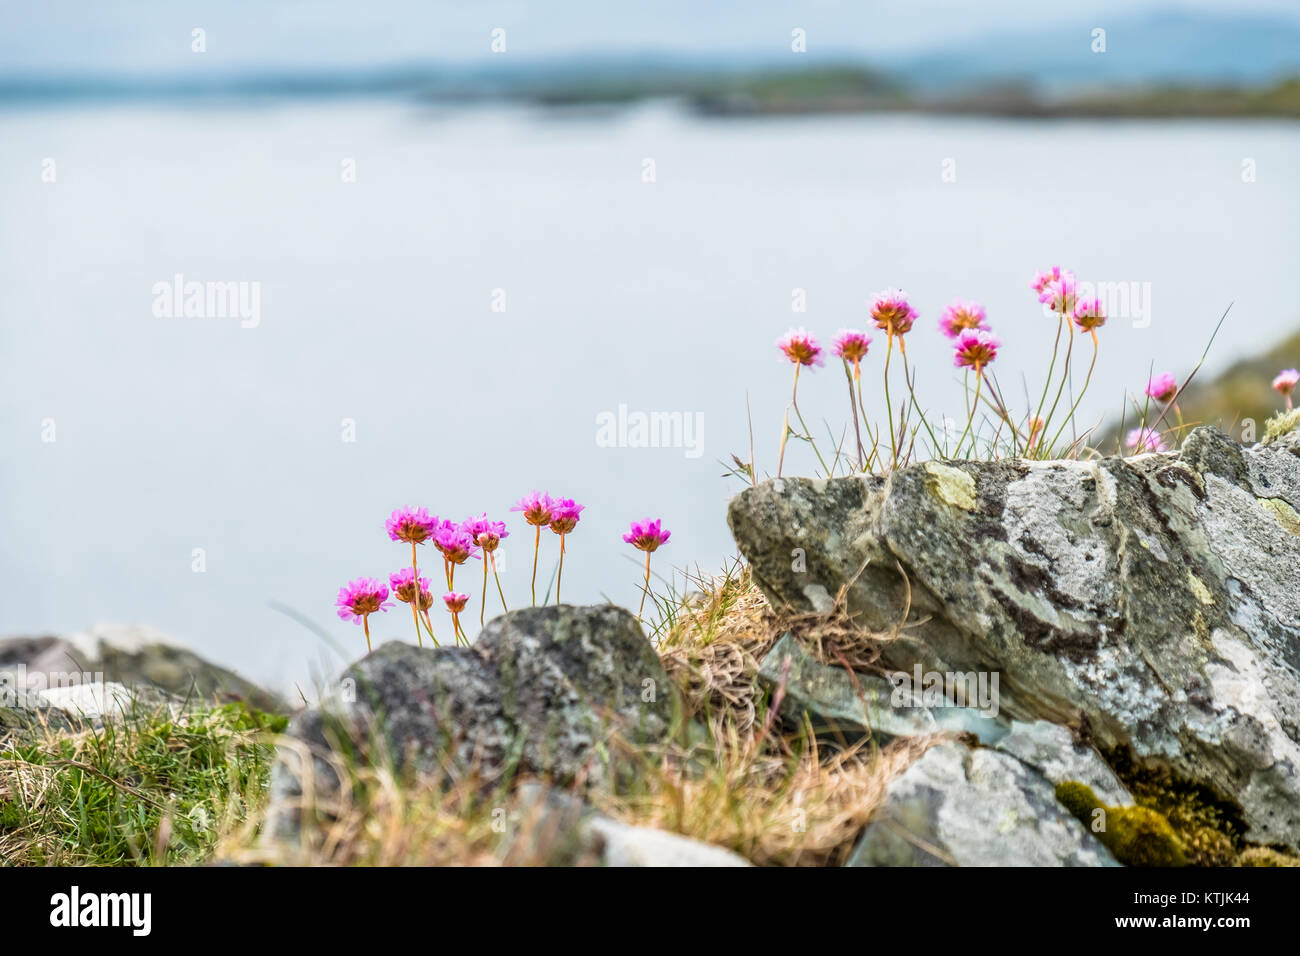 Wild coastal flowers growing on rocks on the shores in Scotland Stock Photo